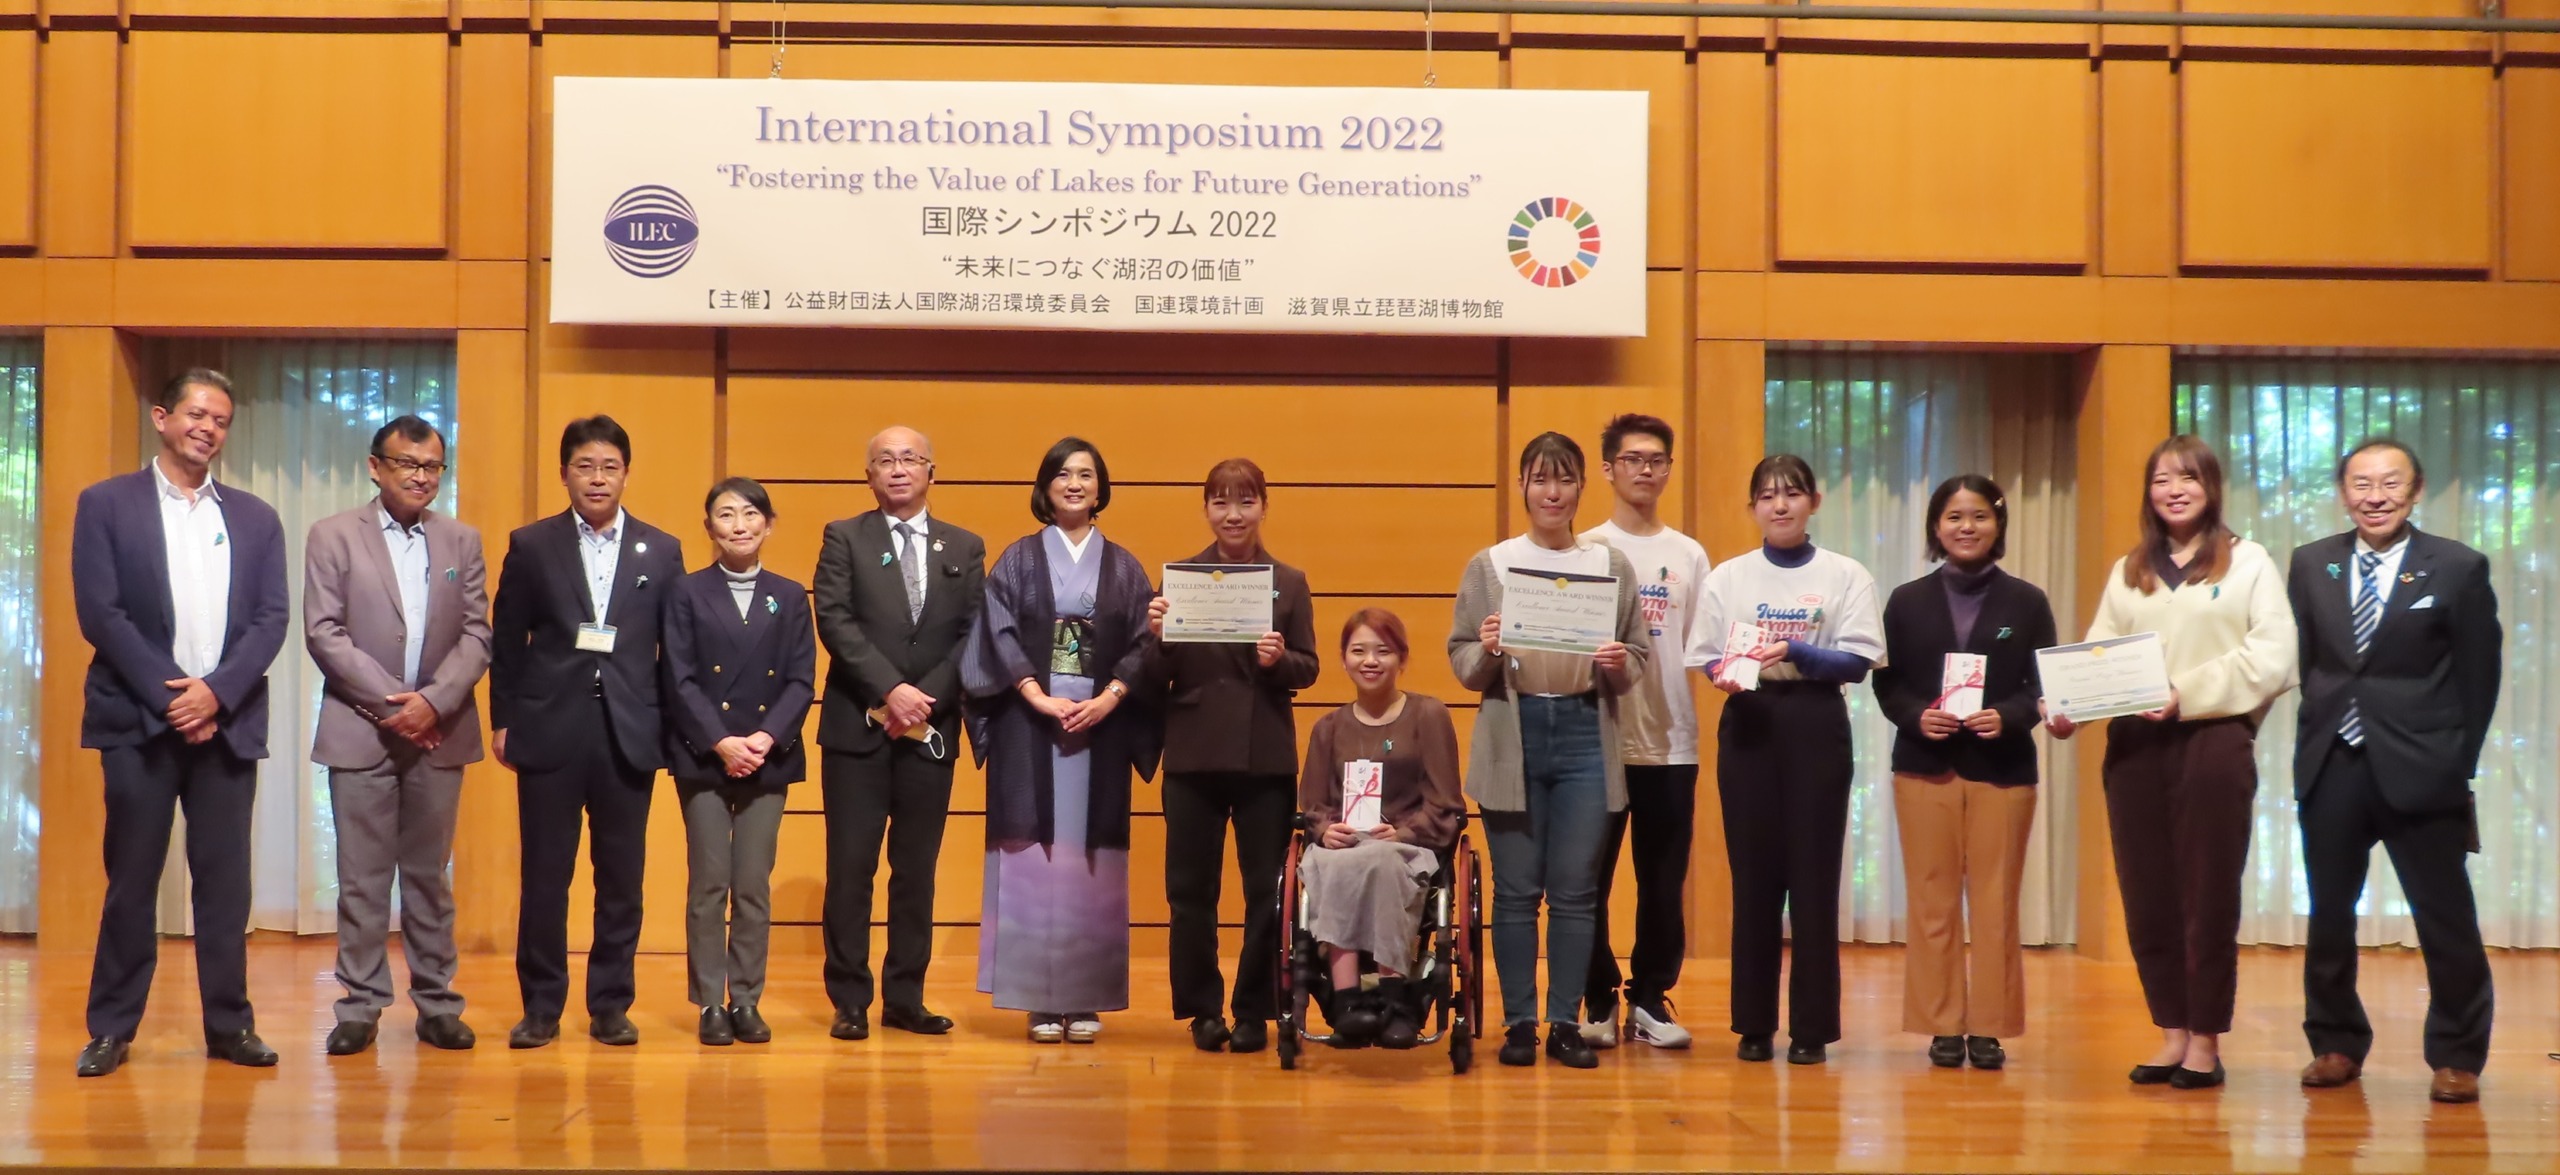 Summary of International Symposium 2022 “Fostering the Value of Lakes for Future Generations”